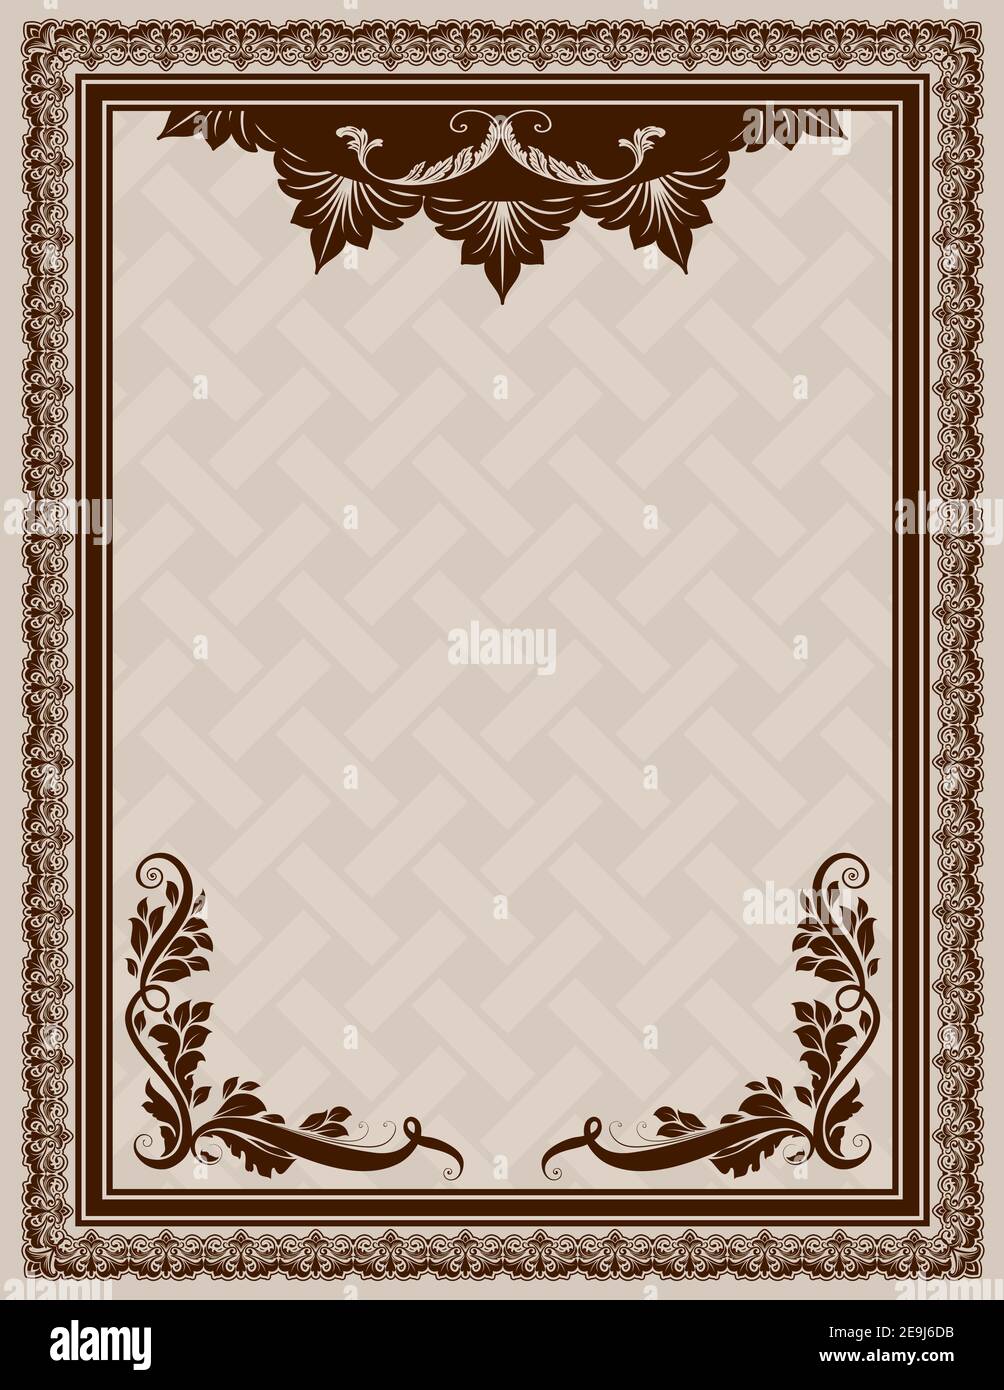 Decorative background with elegant border and patterns. Vintage invitation  card template Stock Photo - Alamy